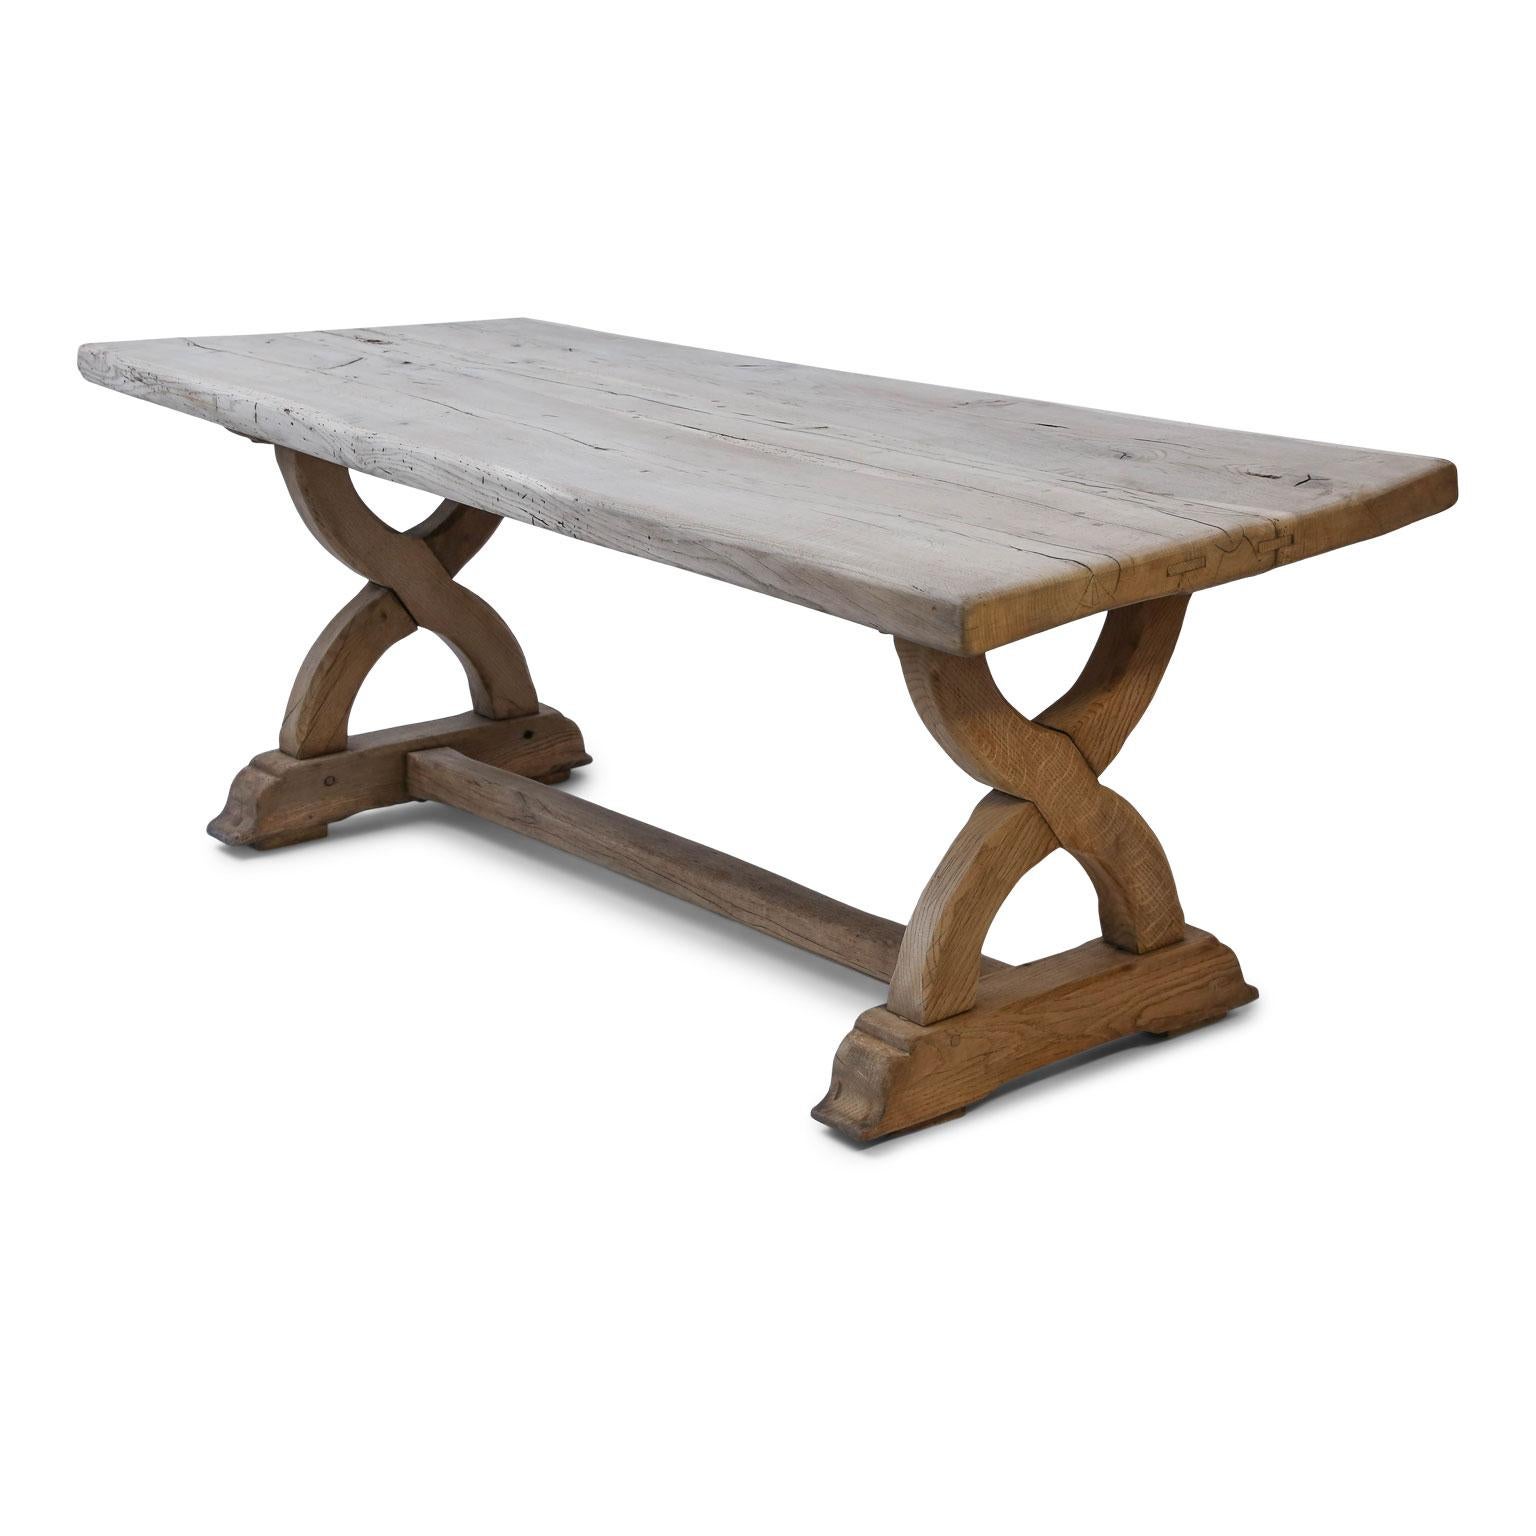 Large bleached oak table: Thick rectangular top supported by trestle base. French in origin (probably Alsace region) and dates to the late 19th century.